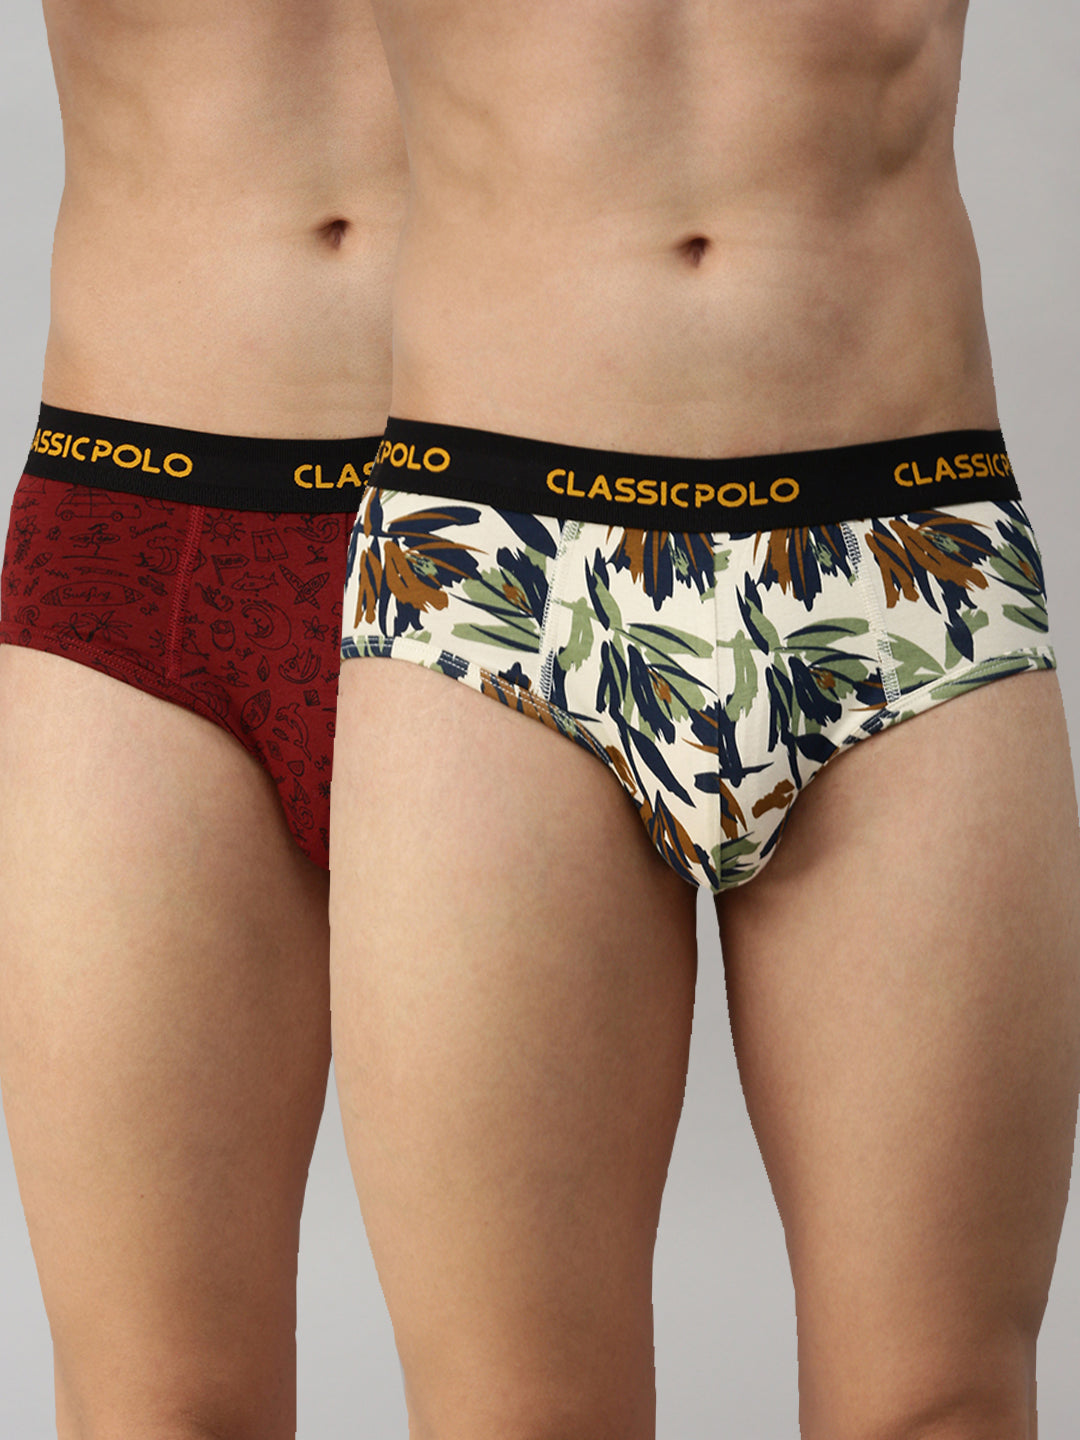 Classic Polo Men's Modal Printed Briefs | Scarce - Red & Yellow (Pack of 2)